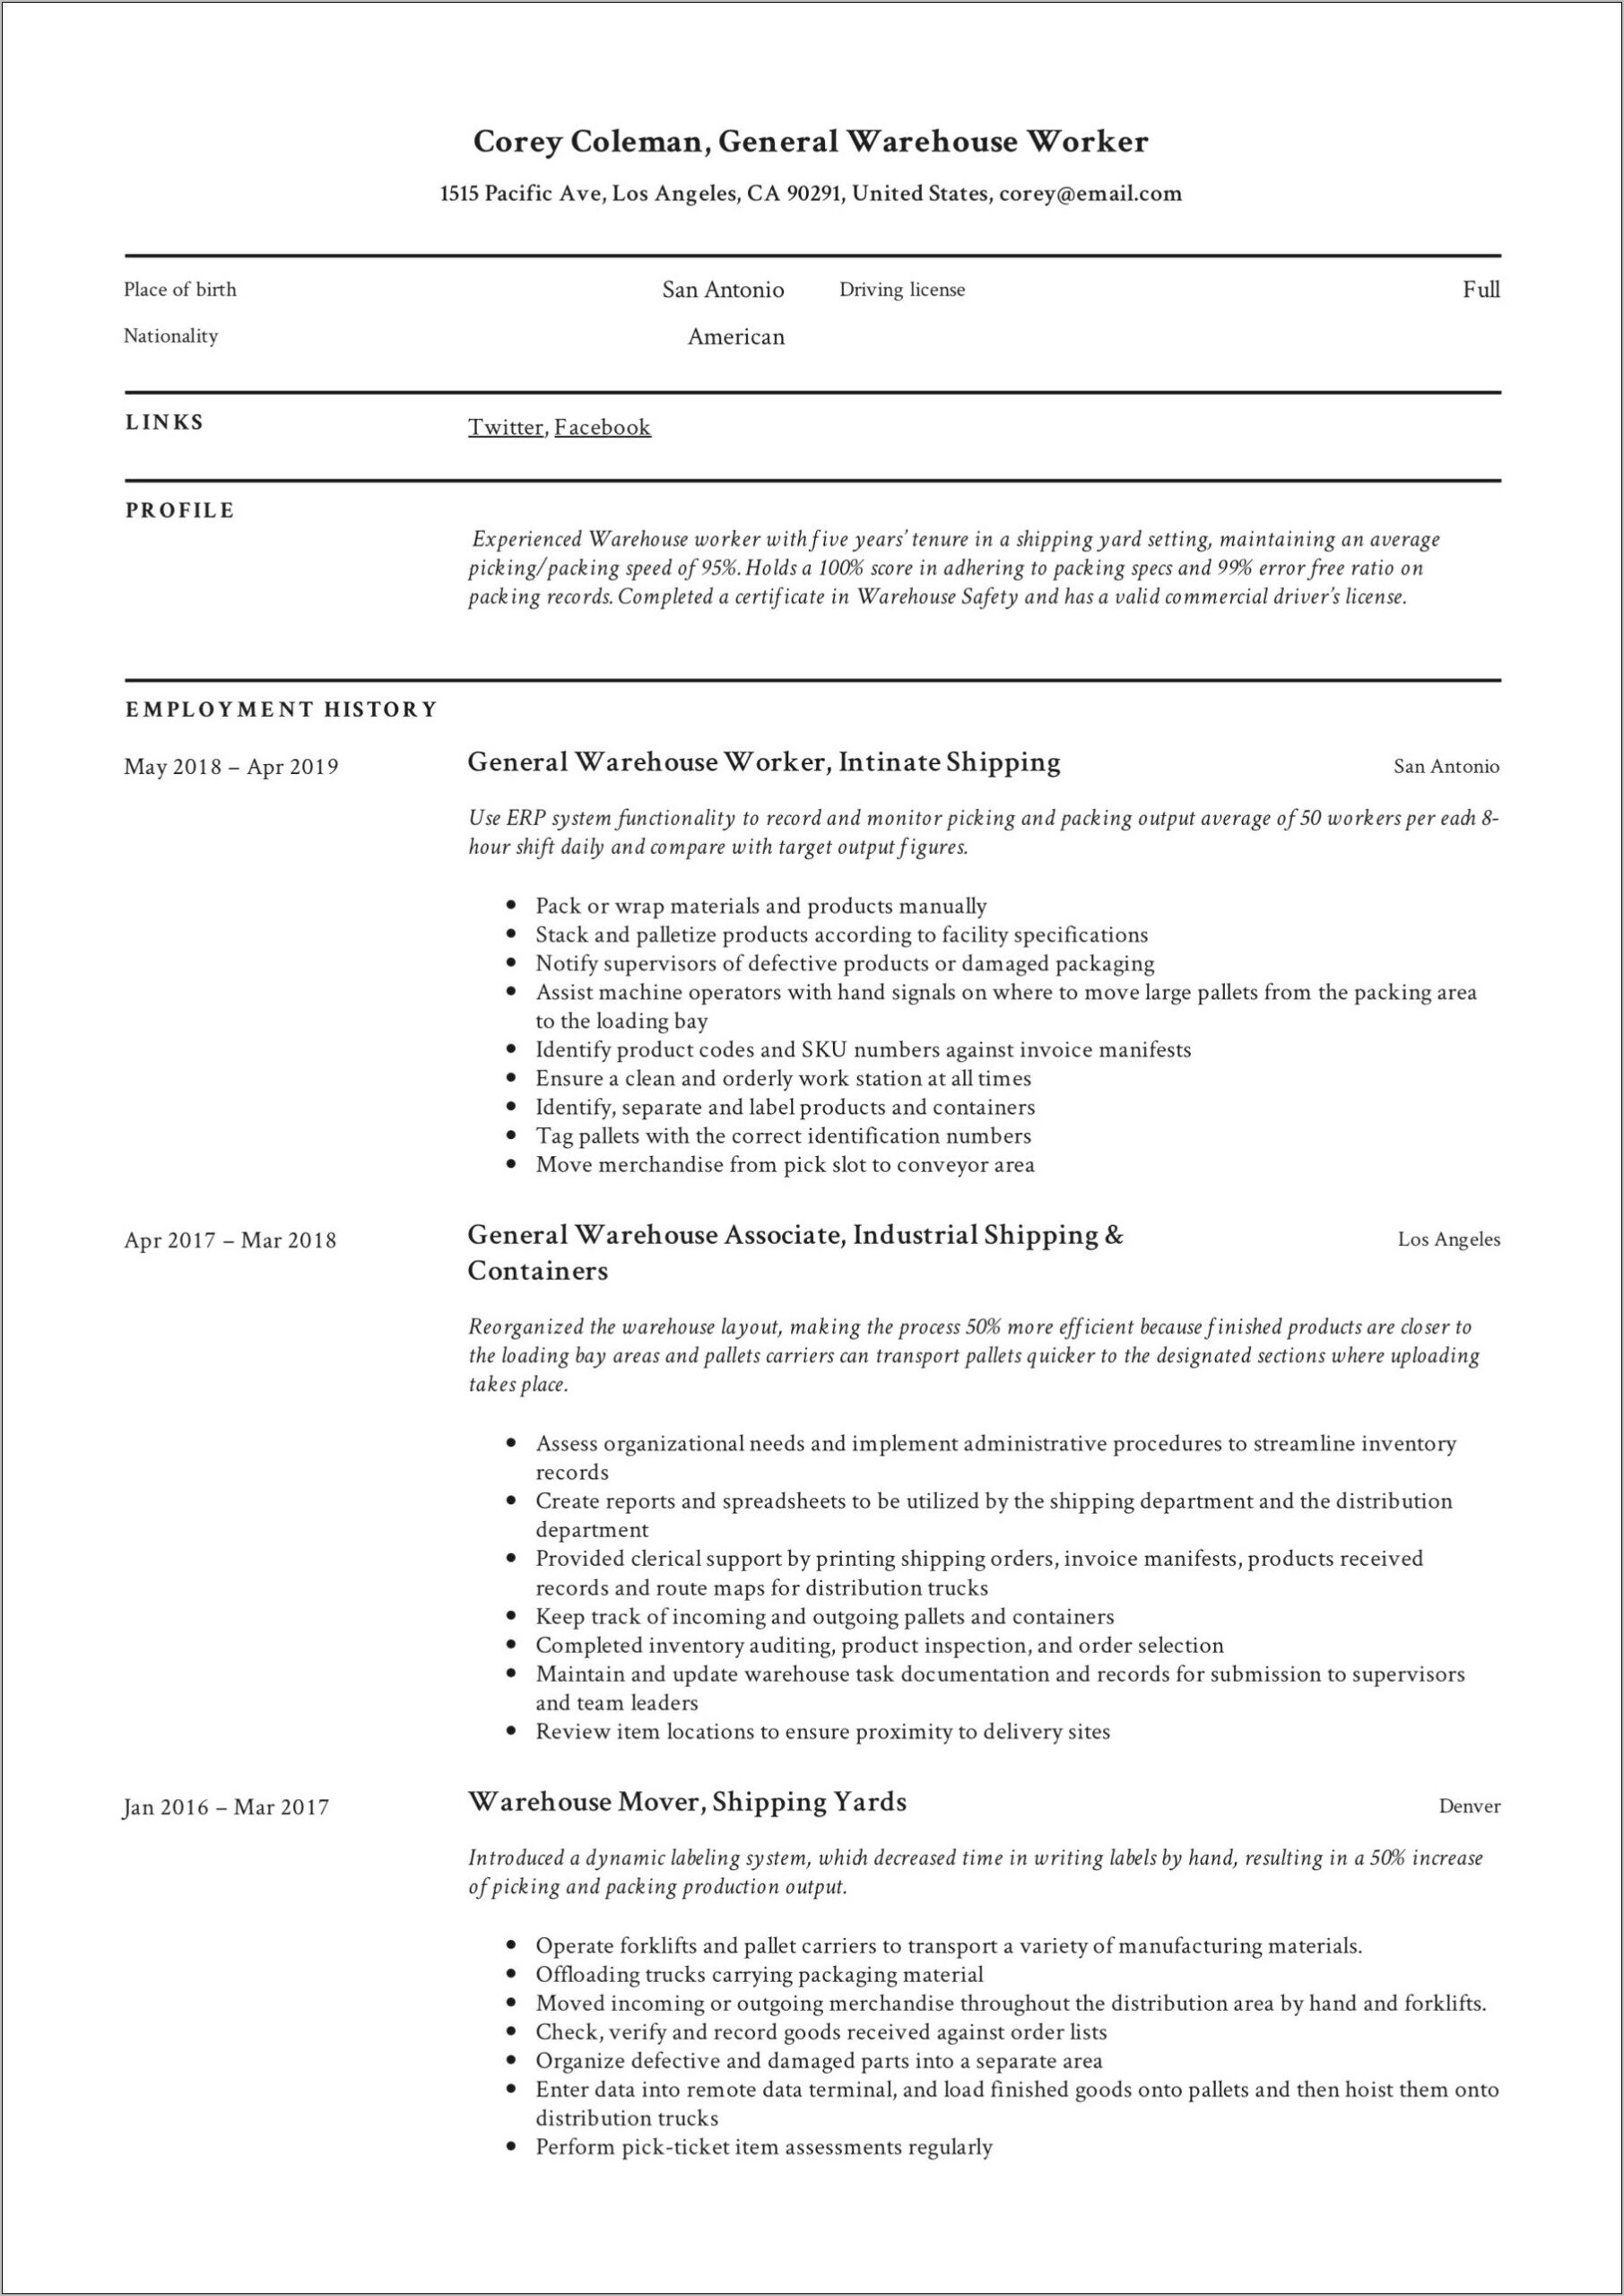 Resume Objective Statement Examples For Warehouse Worker